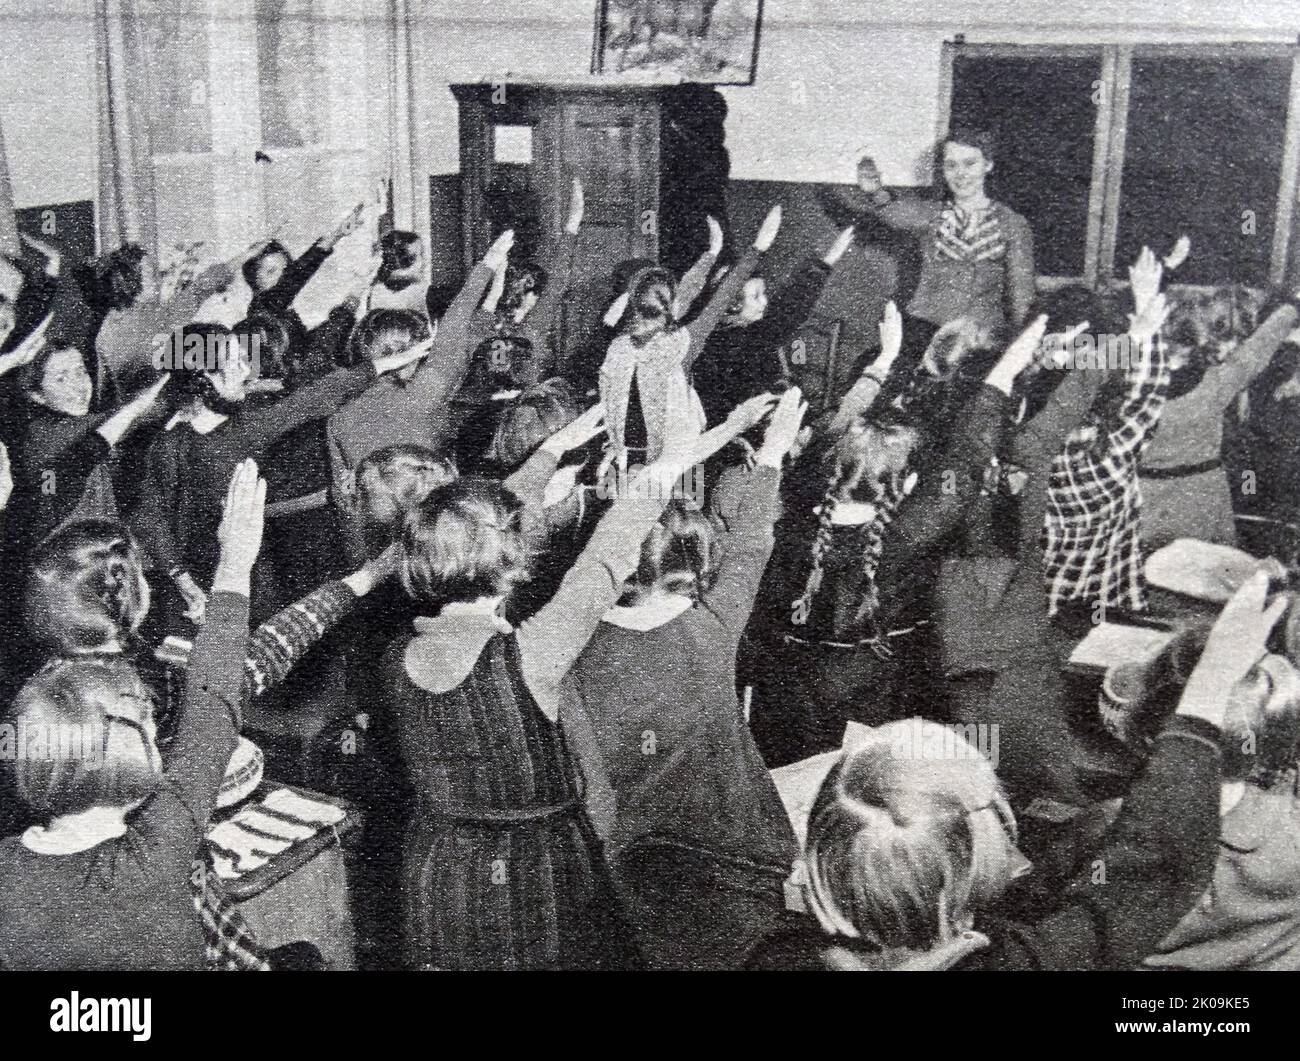 German school children performing the Nazi salute. Nazi Germany, officially known as the German Reich from 1933 until 1943, and the Greater German Reich from 1943 to 1945, was the German state between 1933 and 1945, when Adolf Hitler and the Nazi Party controlled the country, transforming it into a dictatorship. Stock Photo